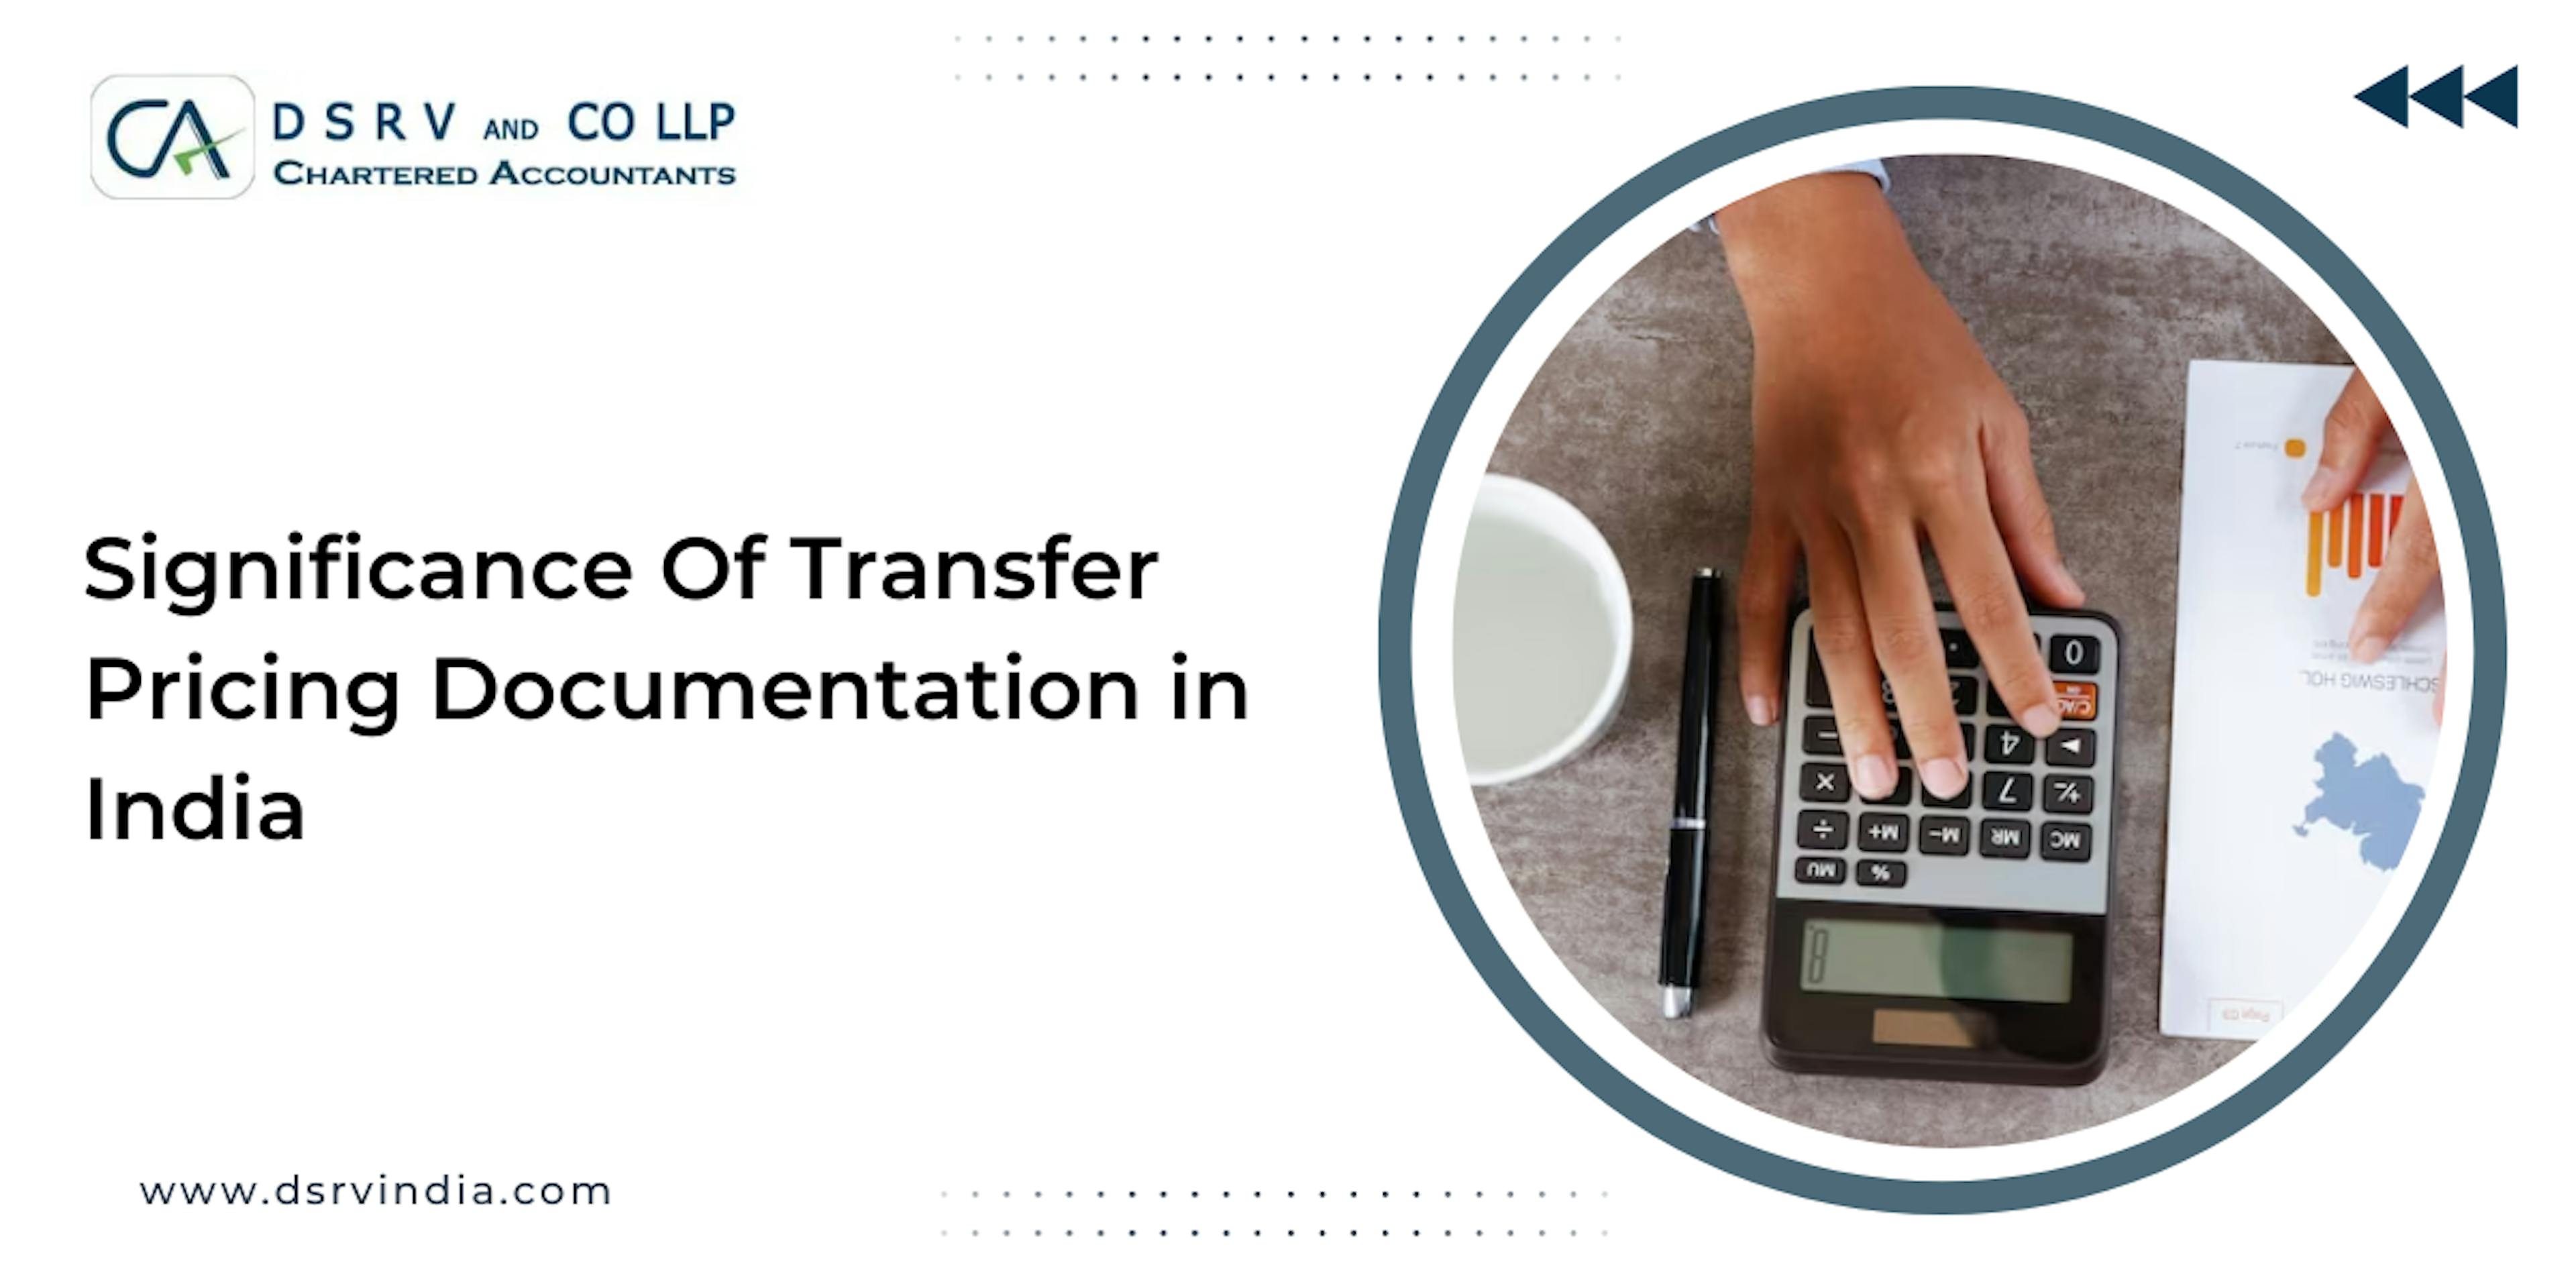 Significance Of Transfer Pricing Documentation in India: Blog Poster